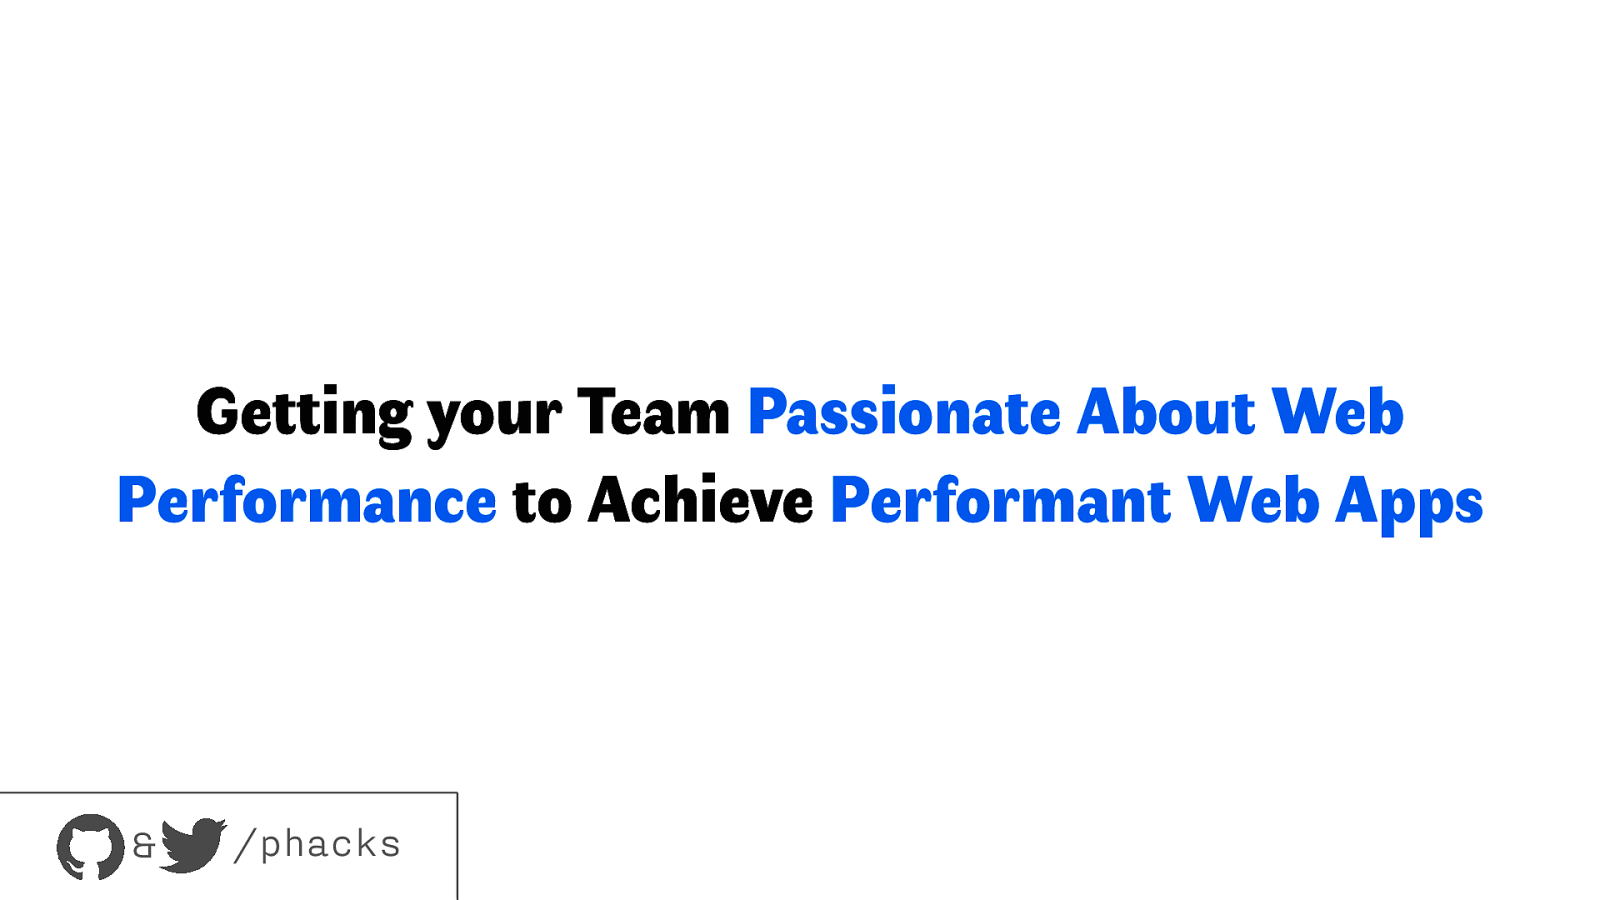 Getting your Team Passionate About Web Performance to Achieve Performant Web Apps